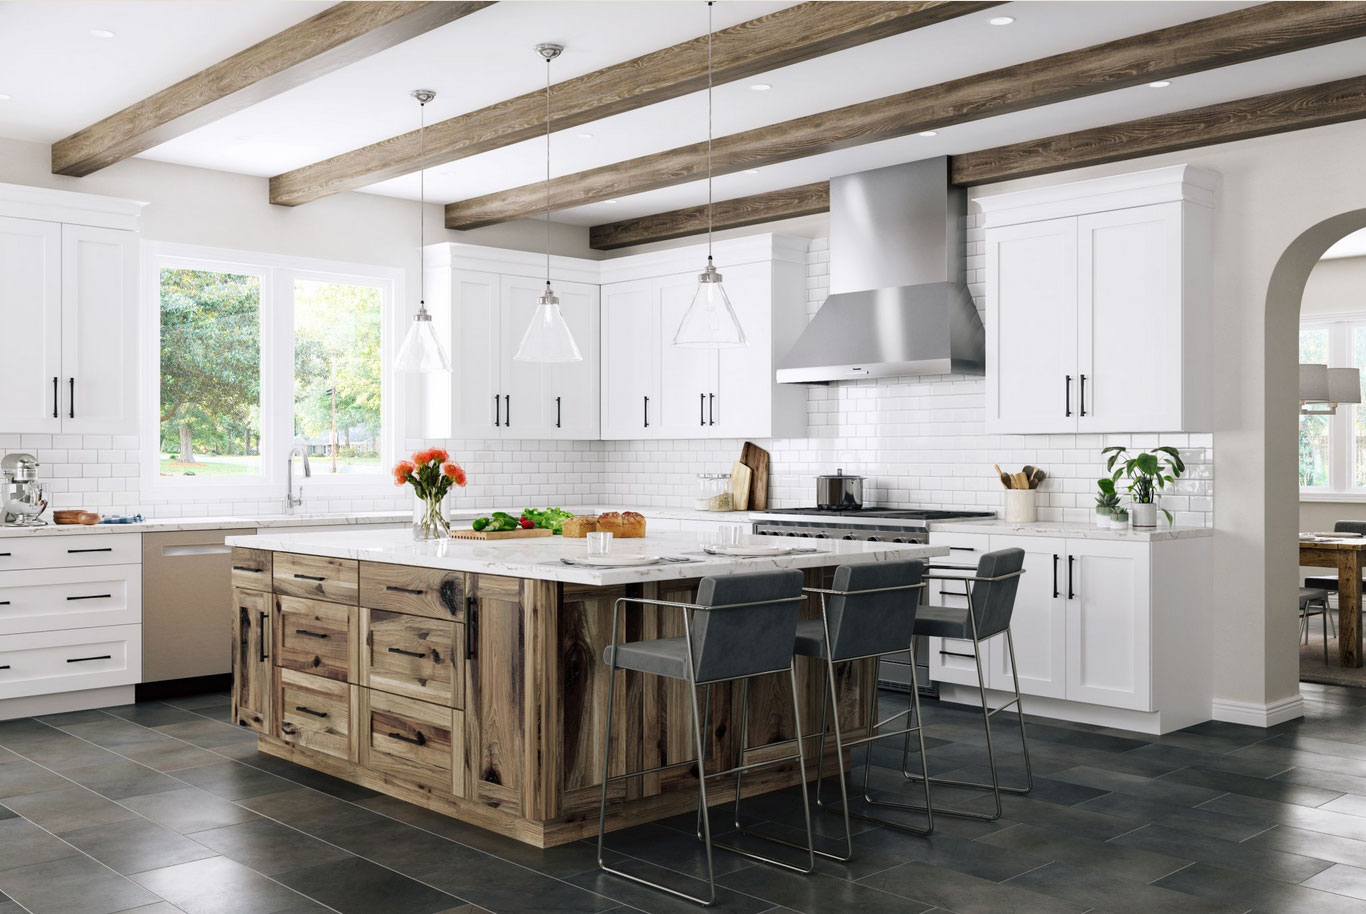 Exceptional cabinetry styles